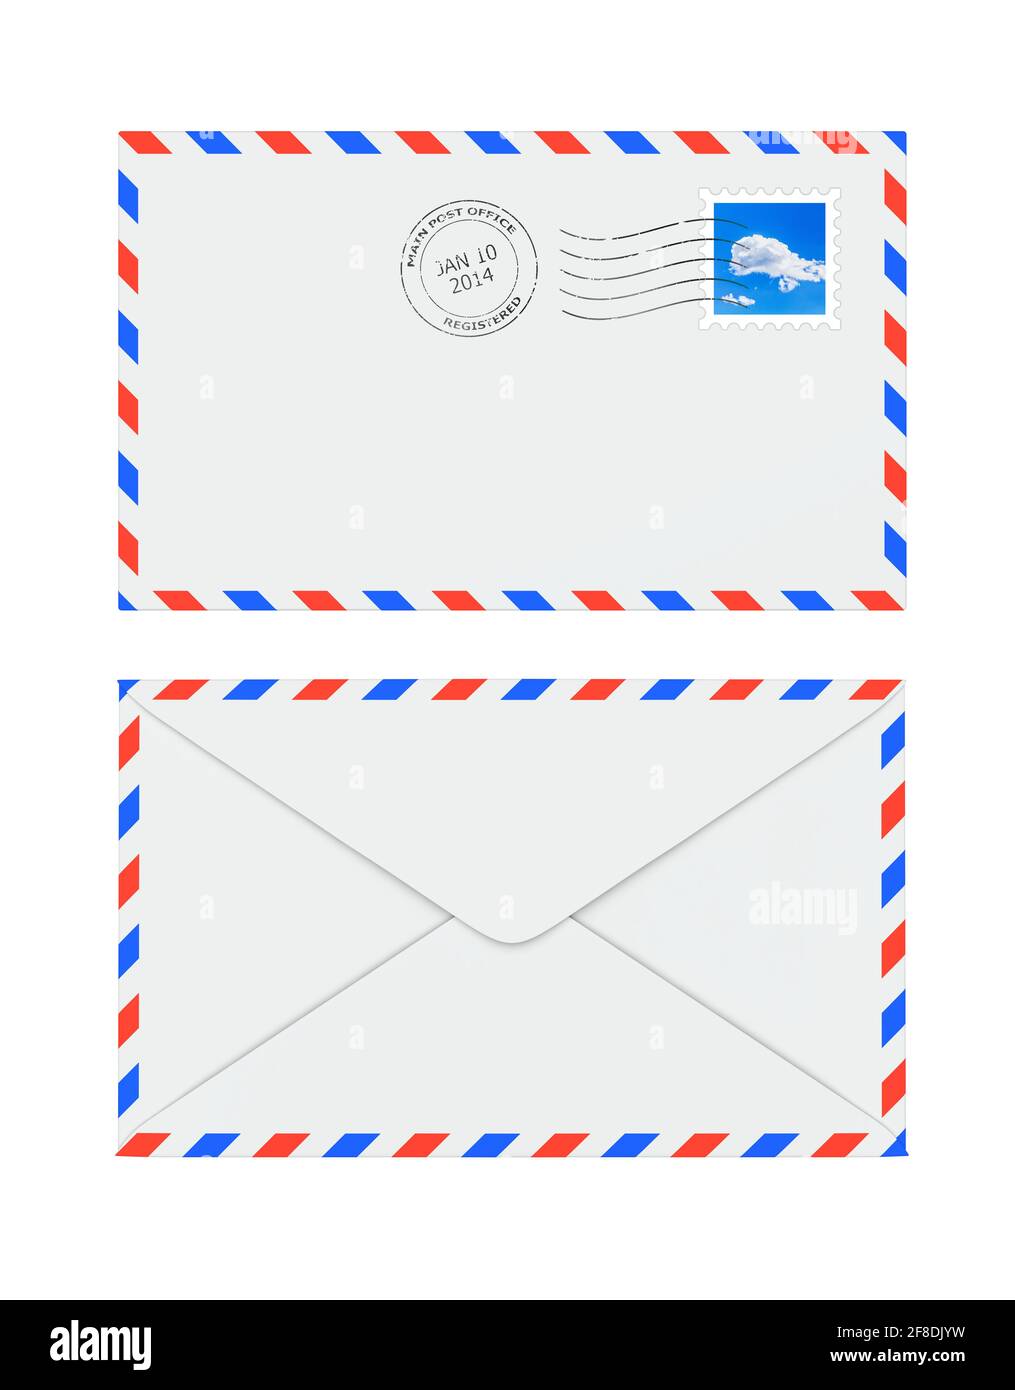 Isolated letter envelope with postage stamp and postmark Stock Photo